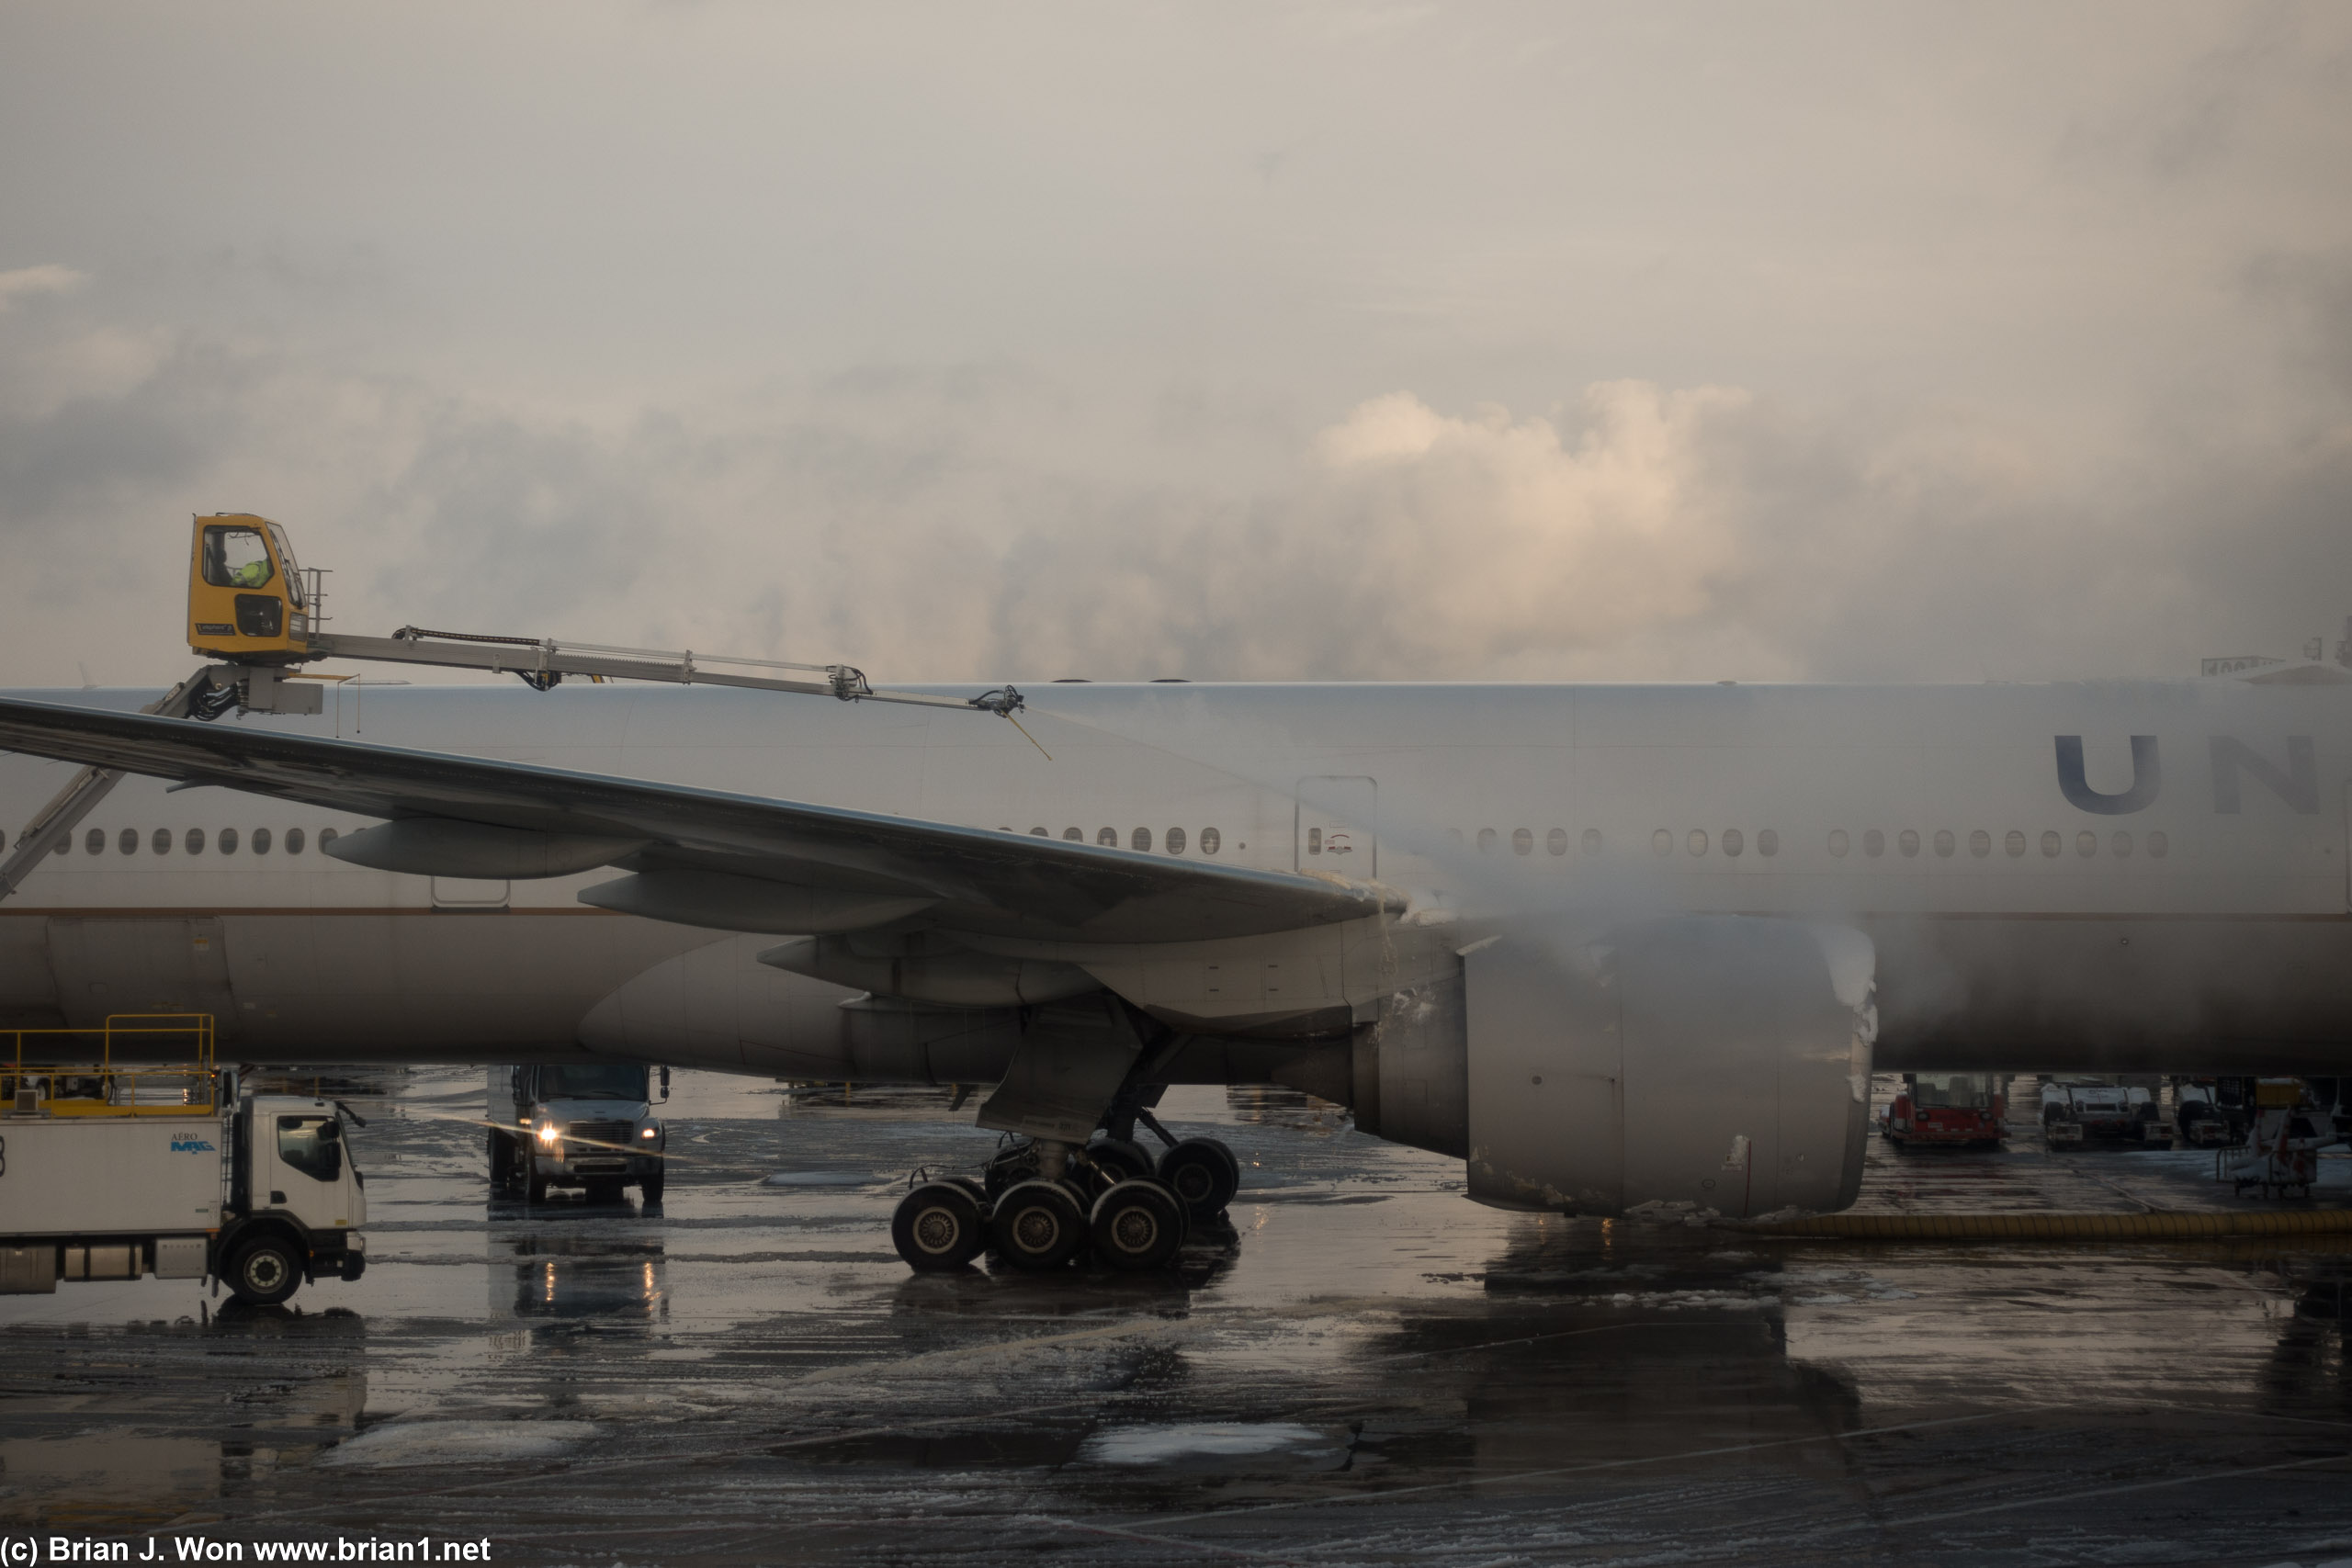 A big 777-300ER being de-iced at the gate.